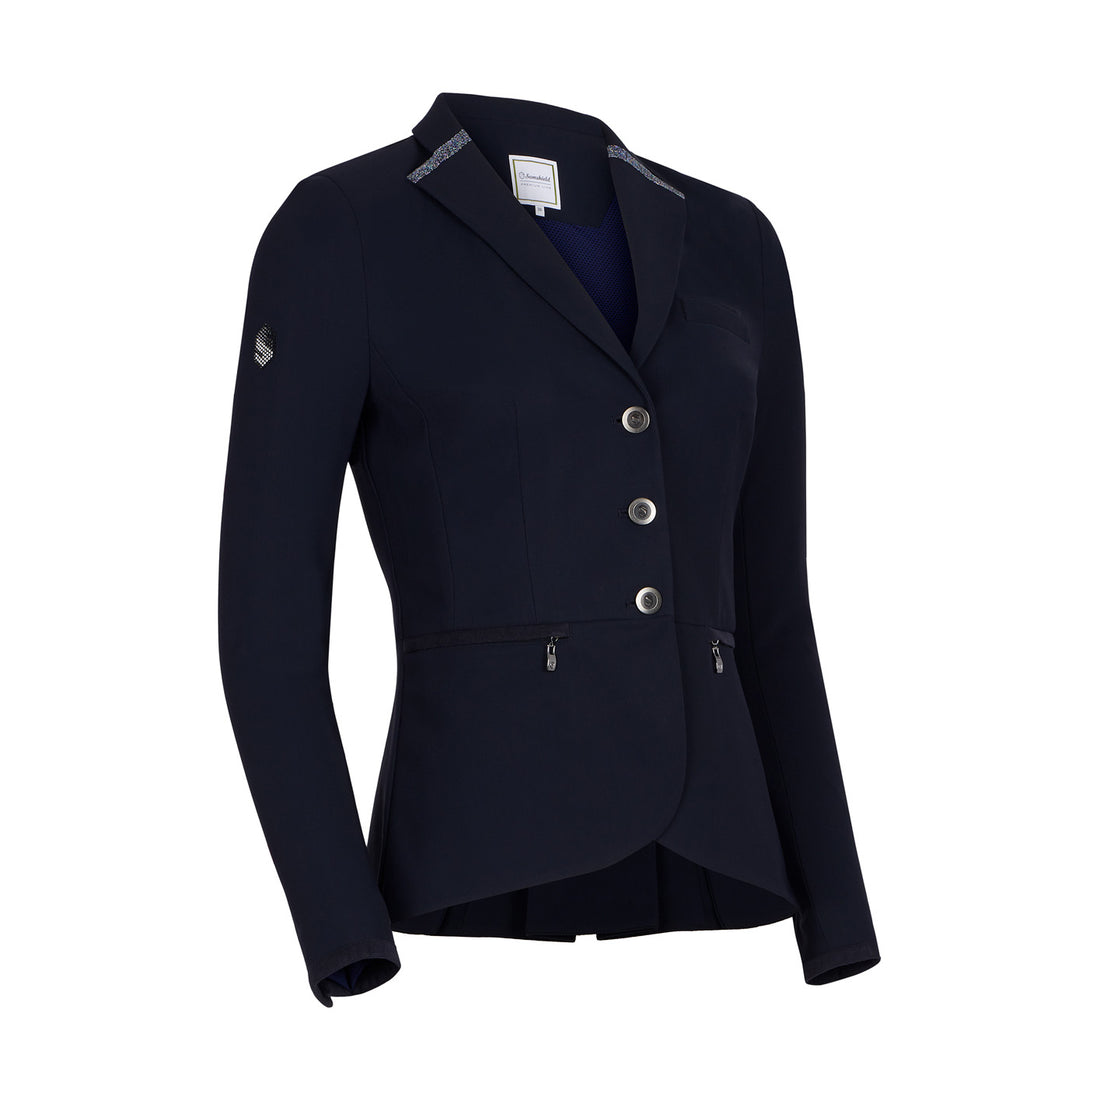 The Victorine Crystal Competition Jacket from Samshield.  This jacket offers a tailored fit giving an elegant silhouette. Made with a technical, breathable material with UV protection to take you through the seasons.  Finished with Swarovski Crystals on the sleeves and Crystal Fabric on the collar and back.  Available in Navy &amp; Black